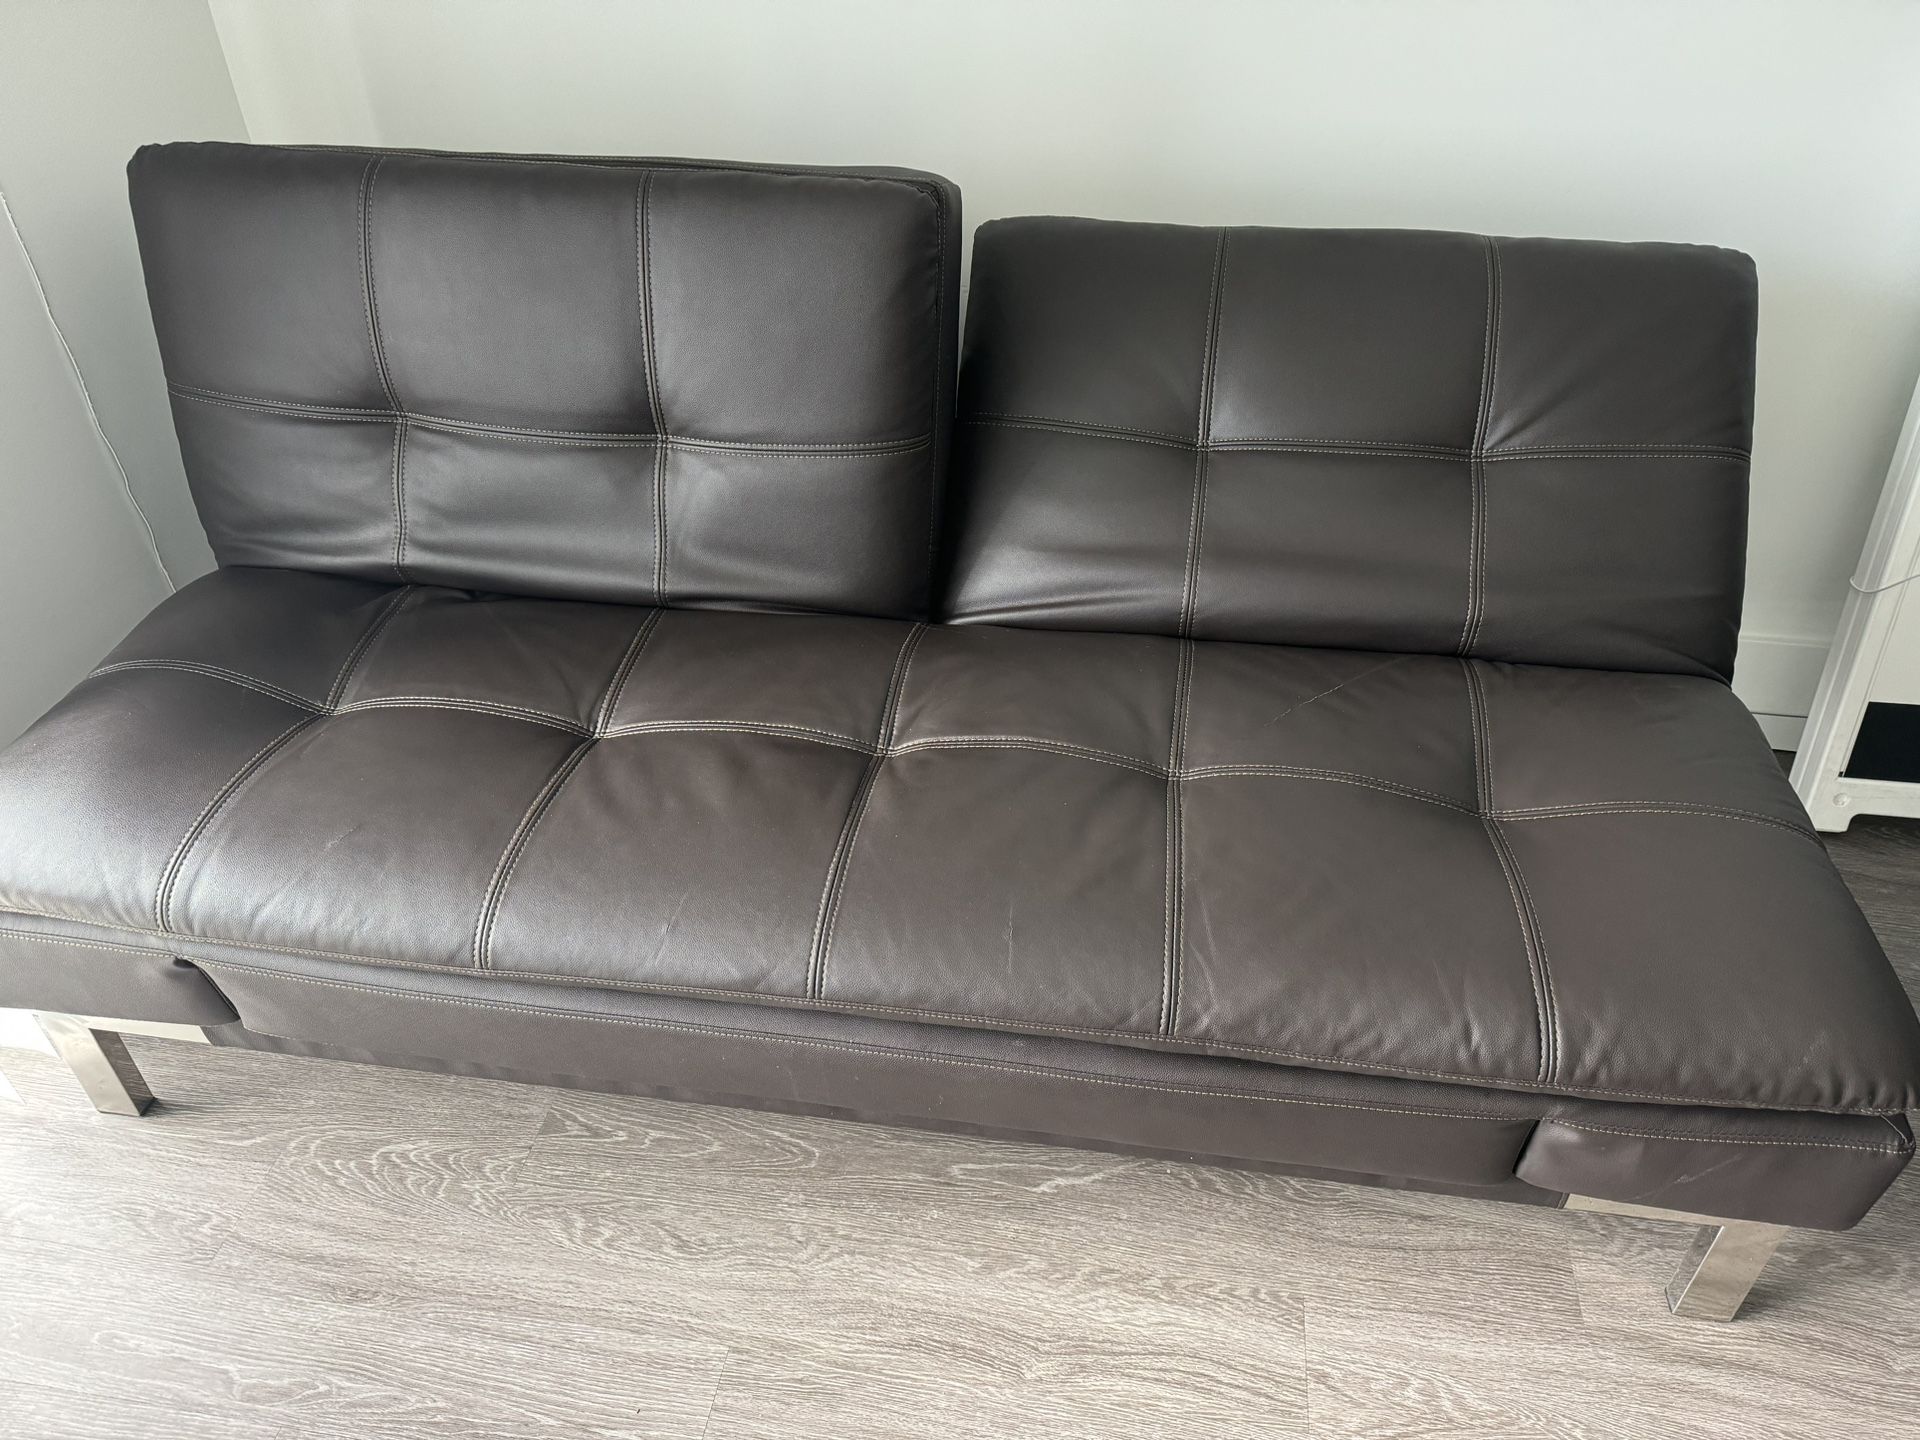 Sofa bed/ Couch